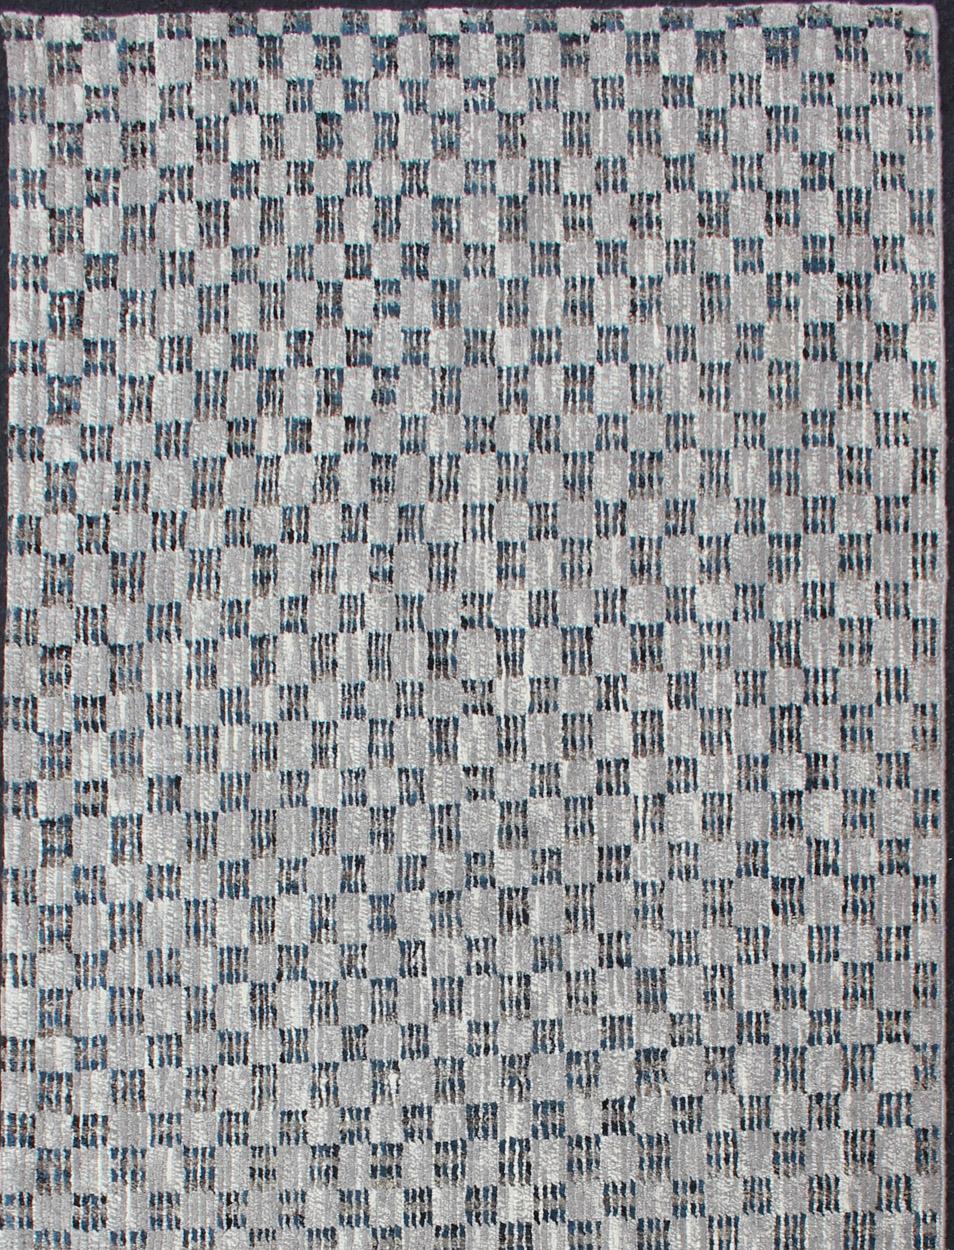 Modern piled rug with checkerboard design in blue and gray, rug/OB-955670, country of origin / type: India/ Piled, condition: new

This brand new rug features a modern checkerboard design and a combination of grays and blues composition. The color